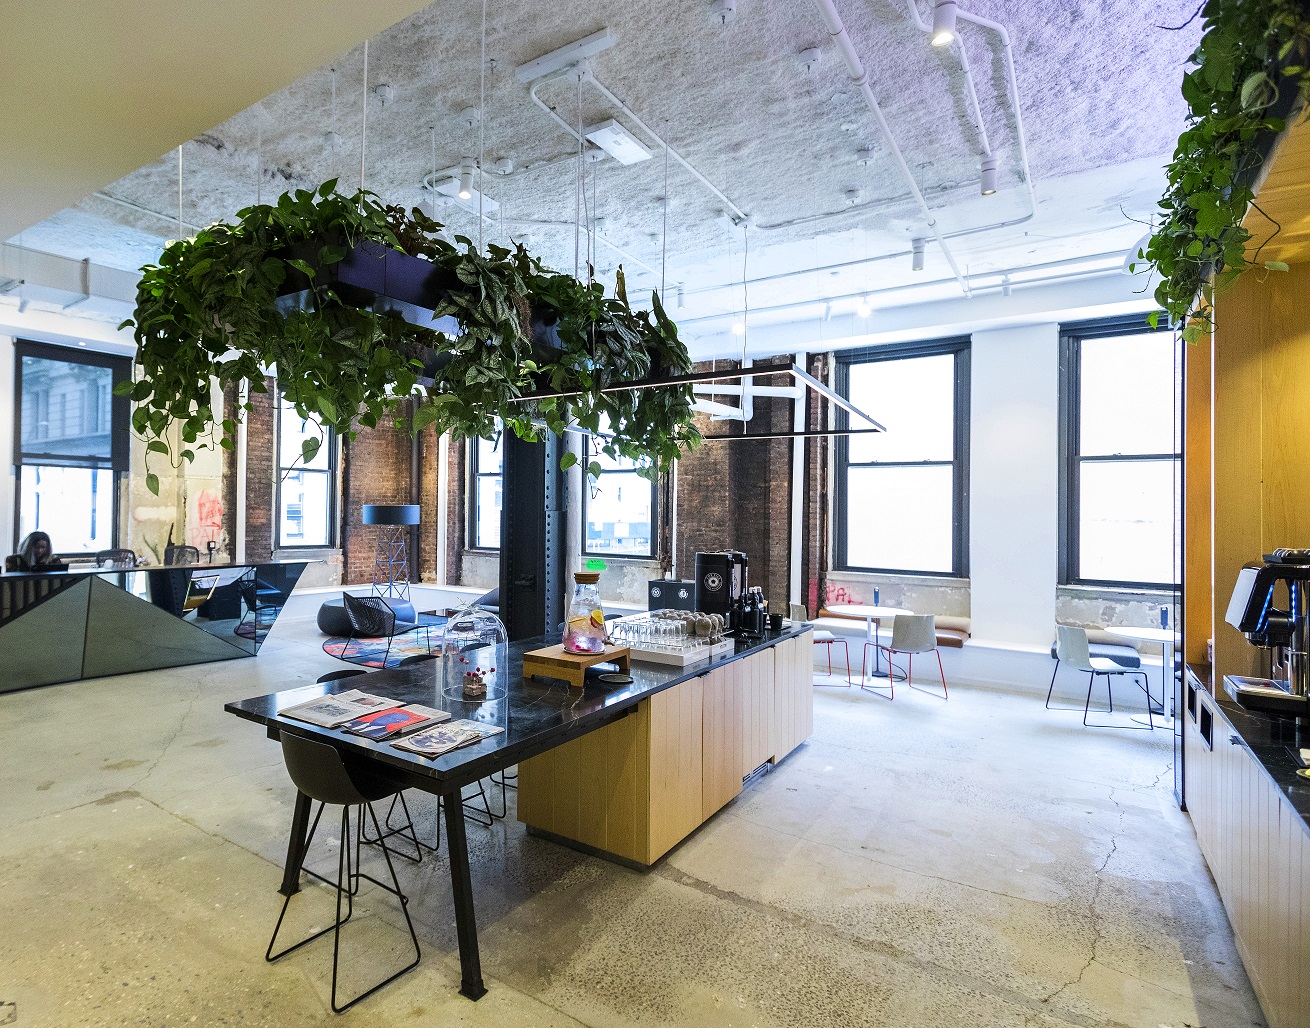 Suspended ceiling planters inspire fresh ideas in this collaborative environment.